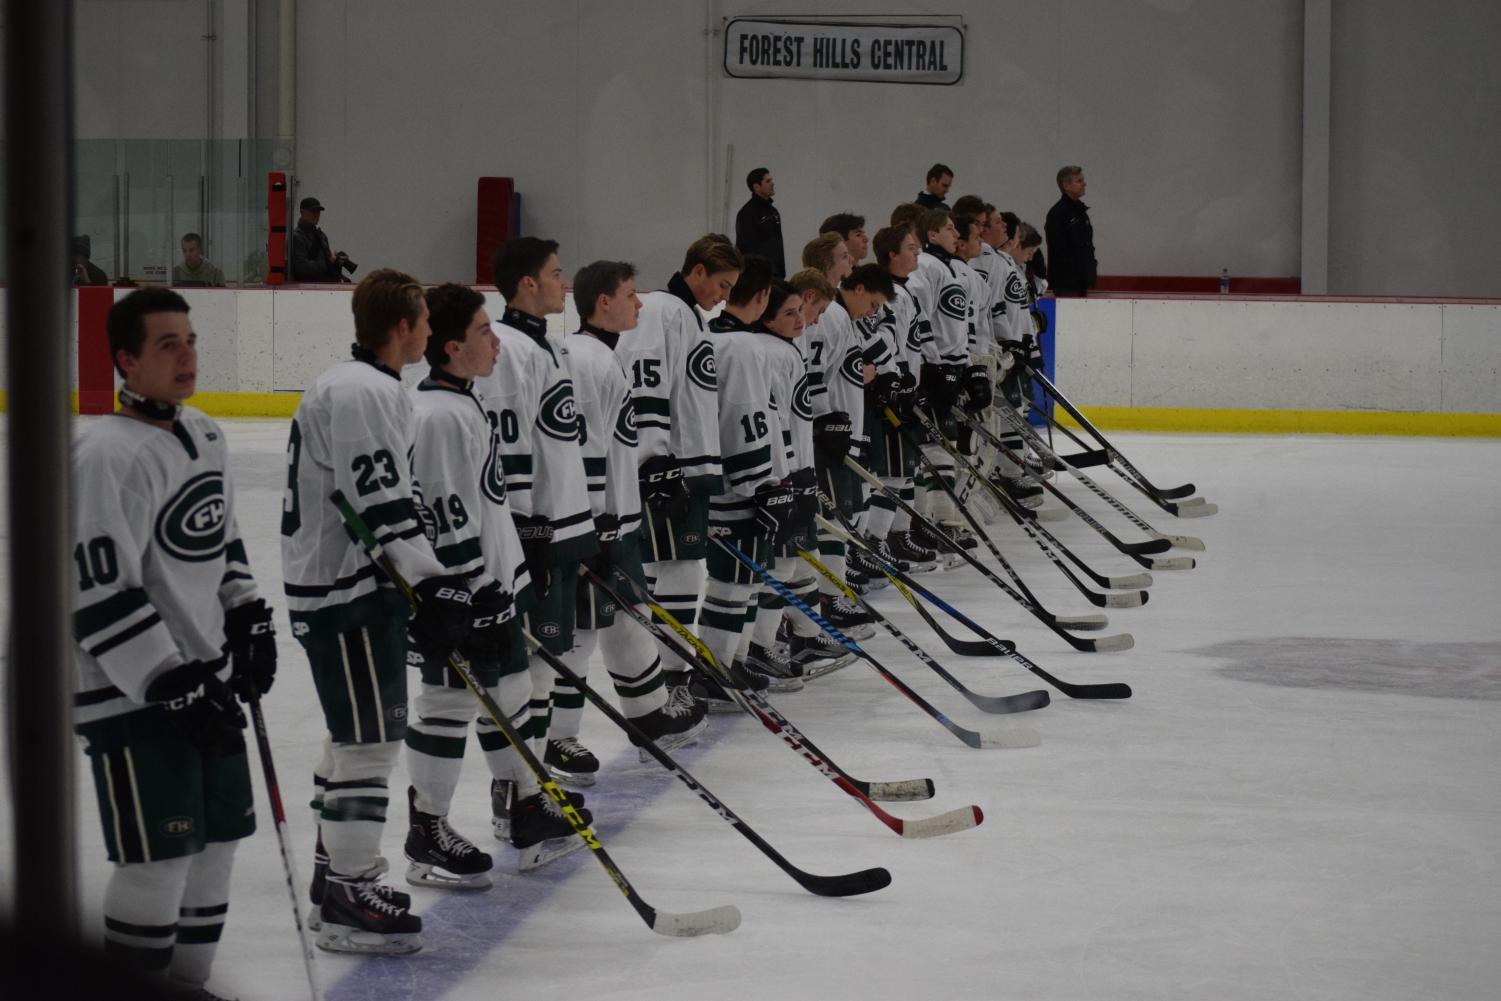 The Penguins' historic run comes to an end – FHC Sports Report